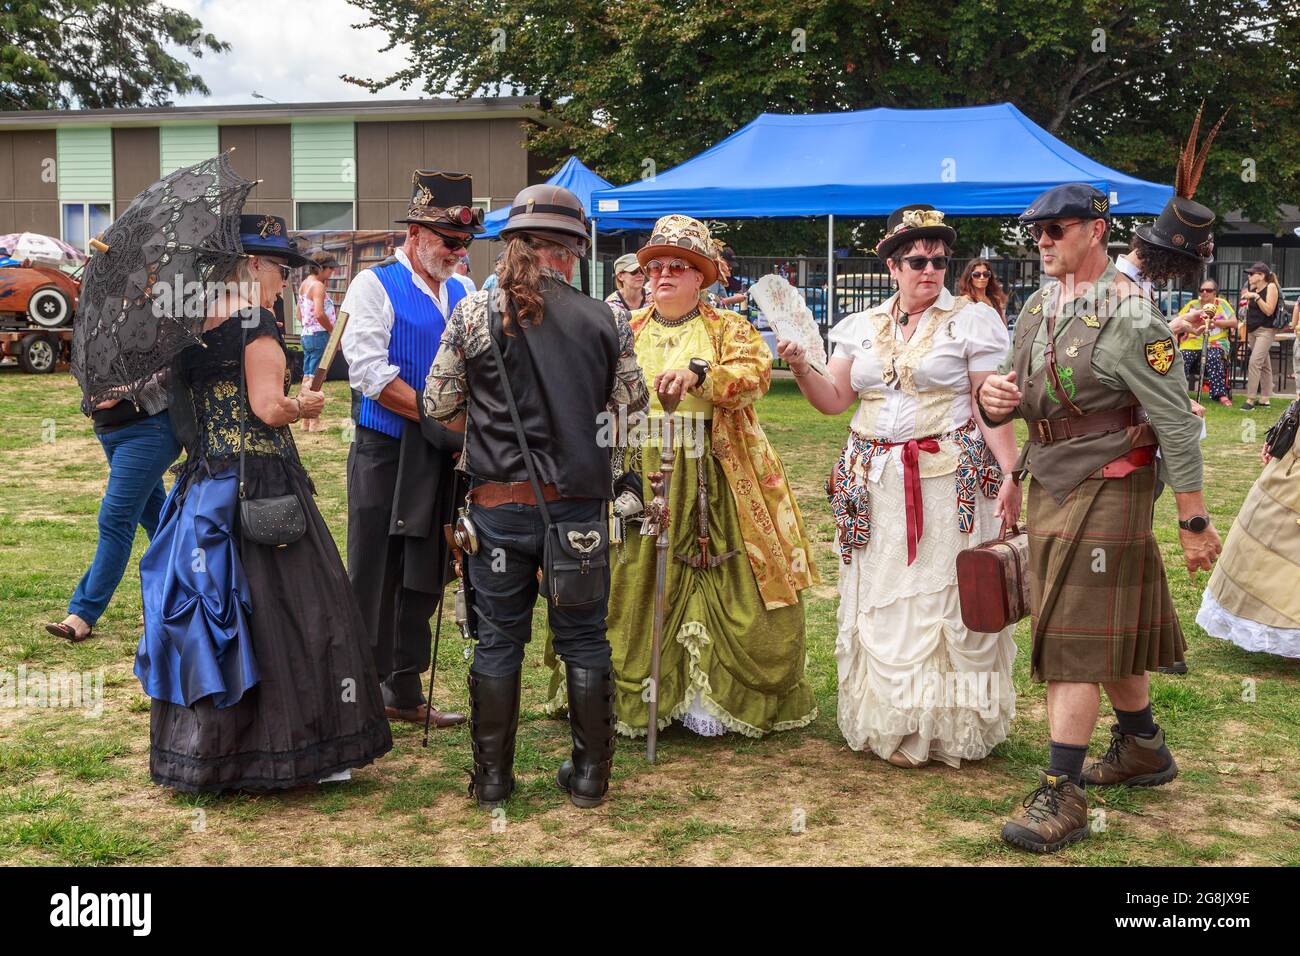 Men and women in costume at a retro and steampunk festival in Tauranga, New Zealand Stock Photo